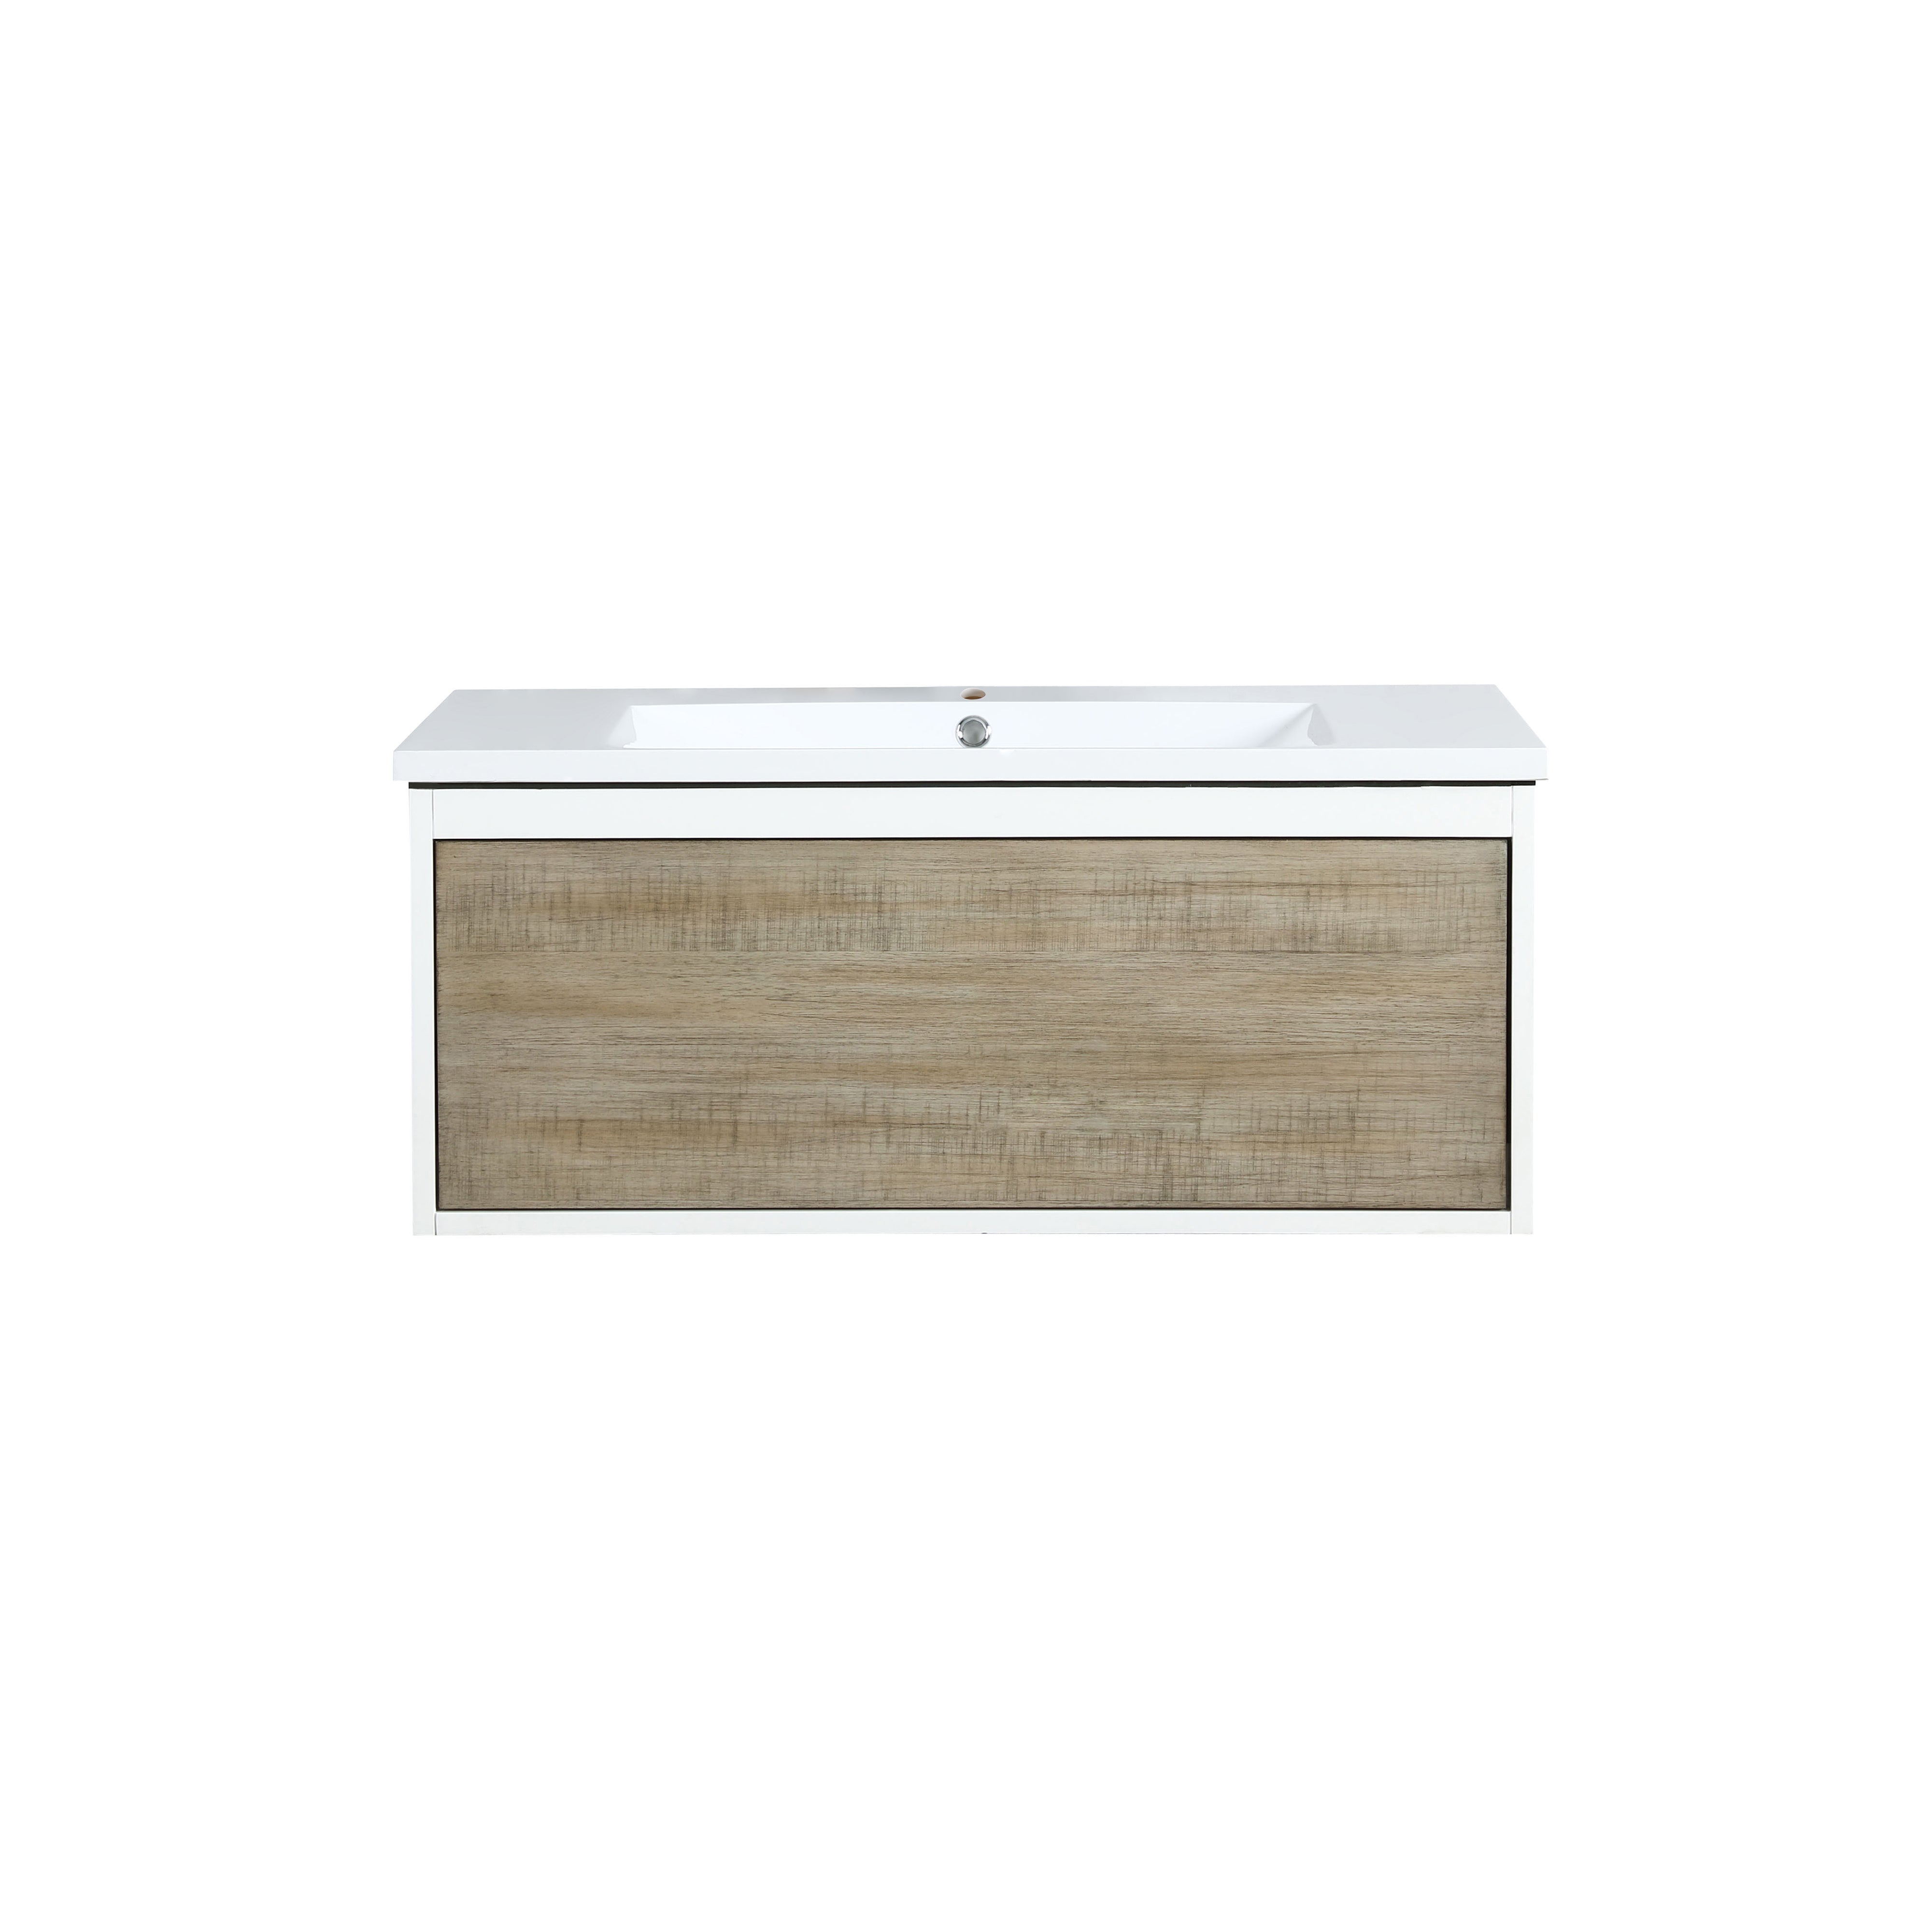 Lexora Scopi LSC36SRAOS000 36" Single Wall Mounted Bathroom Vanity in Rustic Acacia and Acrylic Top, Integrated Rectangle Sink, Front View